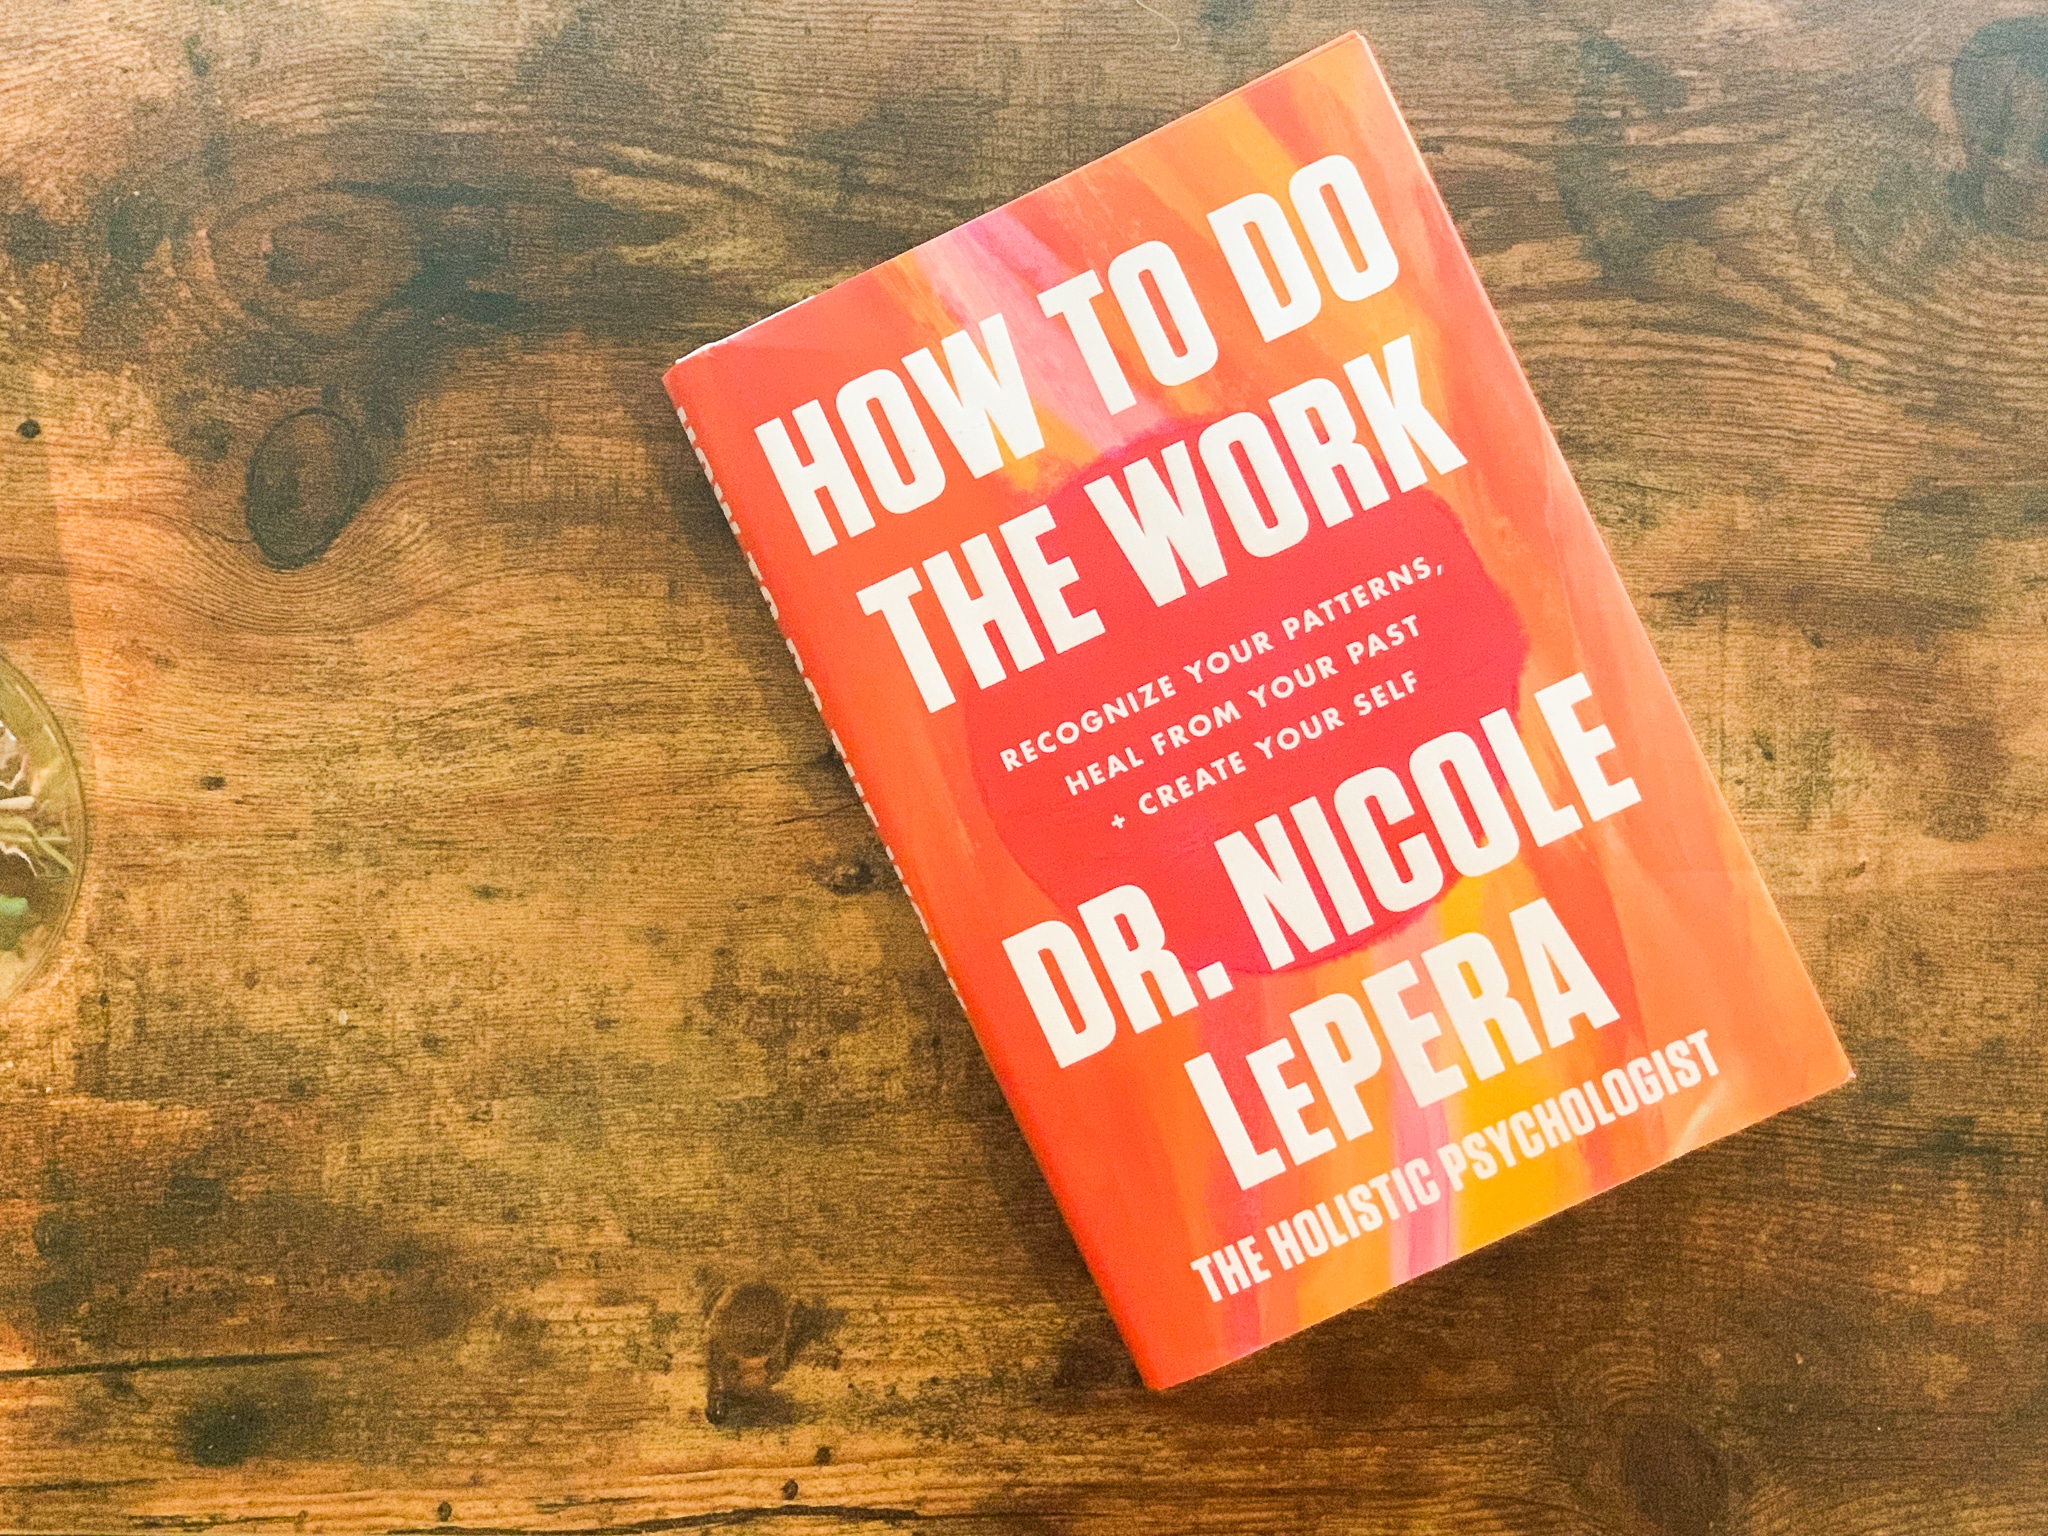 How To Do The Work Book by Nicole LePera sitting on wooden table